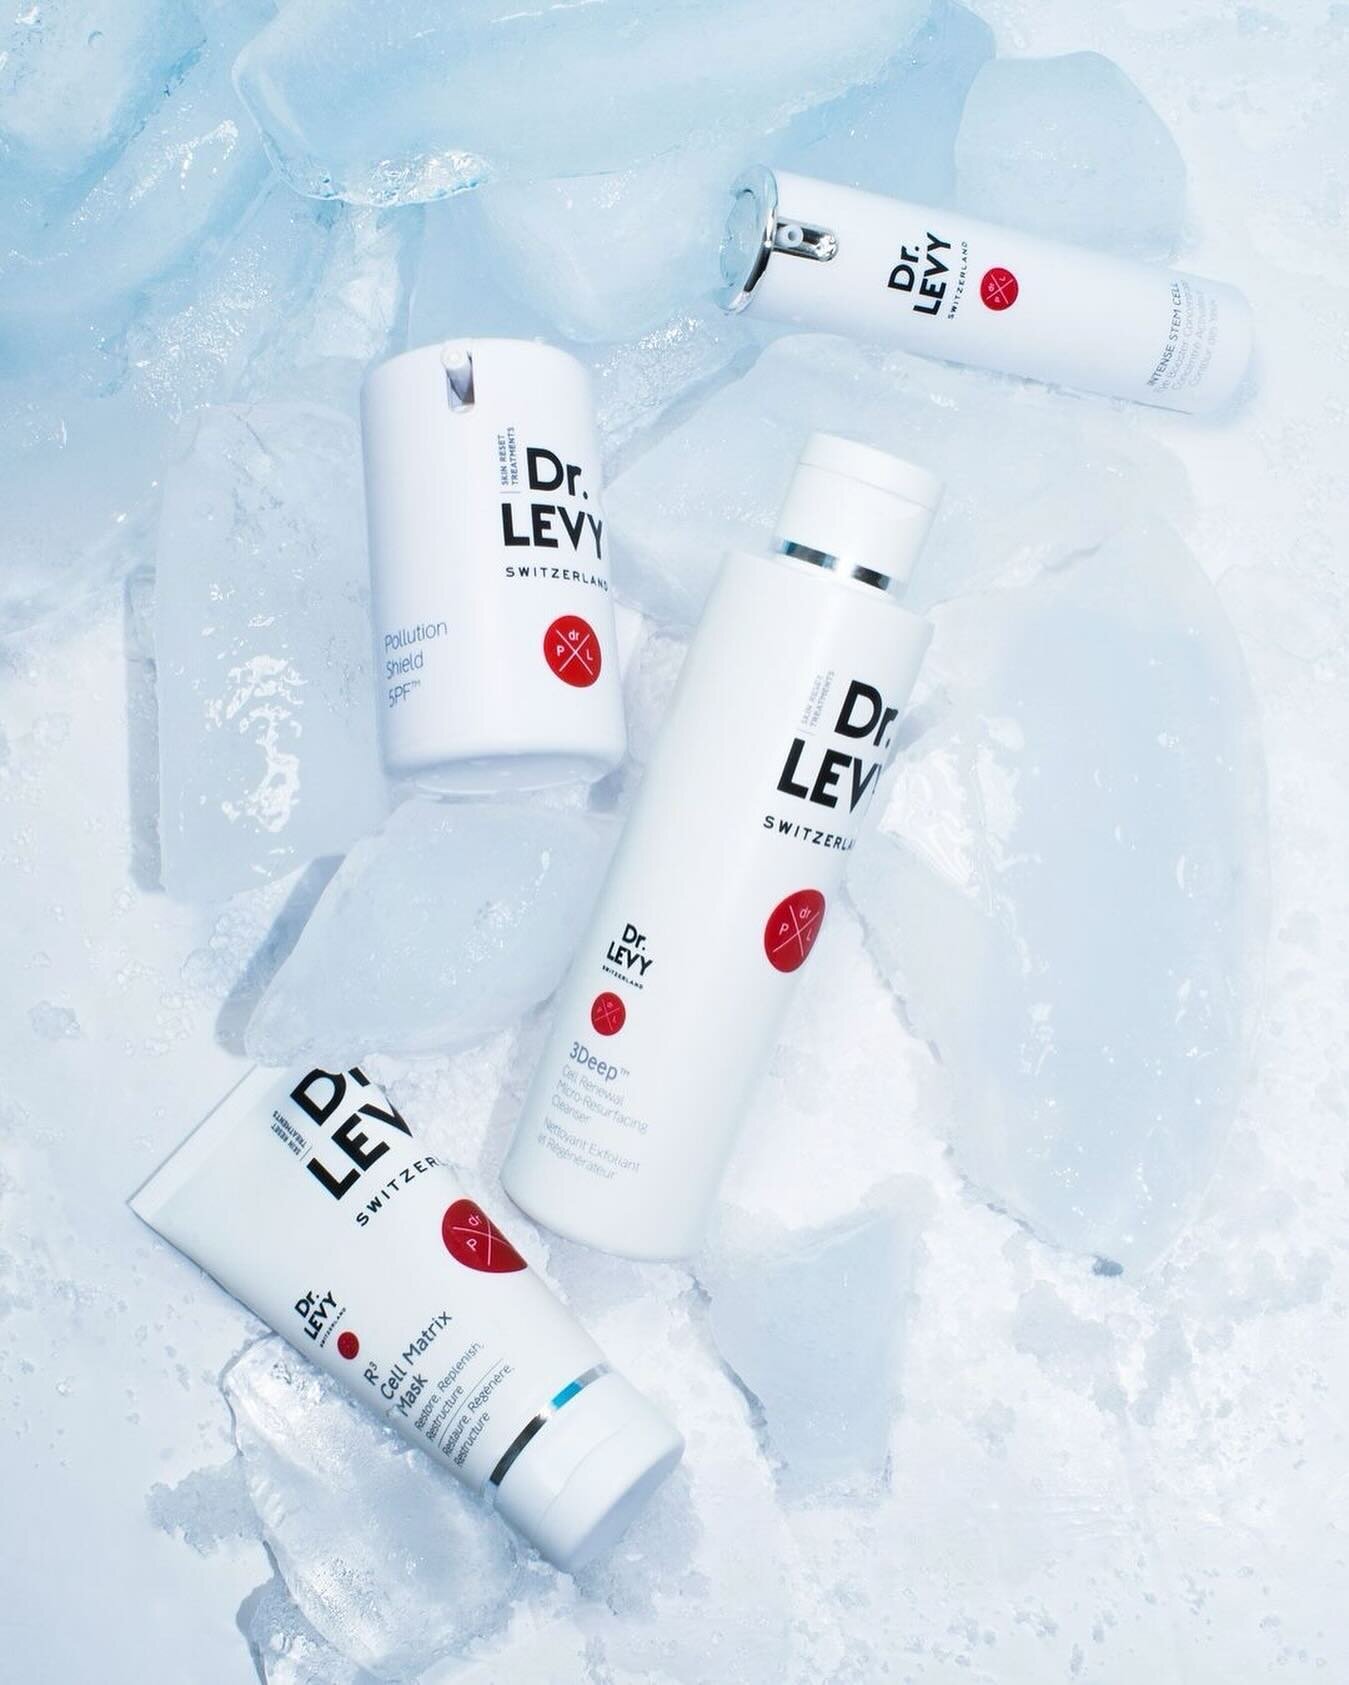 Dr. LEVY Switzerland&nbsp;is the first cosmeceutical proven to stimulate dermal stem cells. Harnessing a Nobel Prize-winning discovery, that ageing is reversible, @drlevyofficial skincare is proven to revitalise the dermal stem cells that create esse